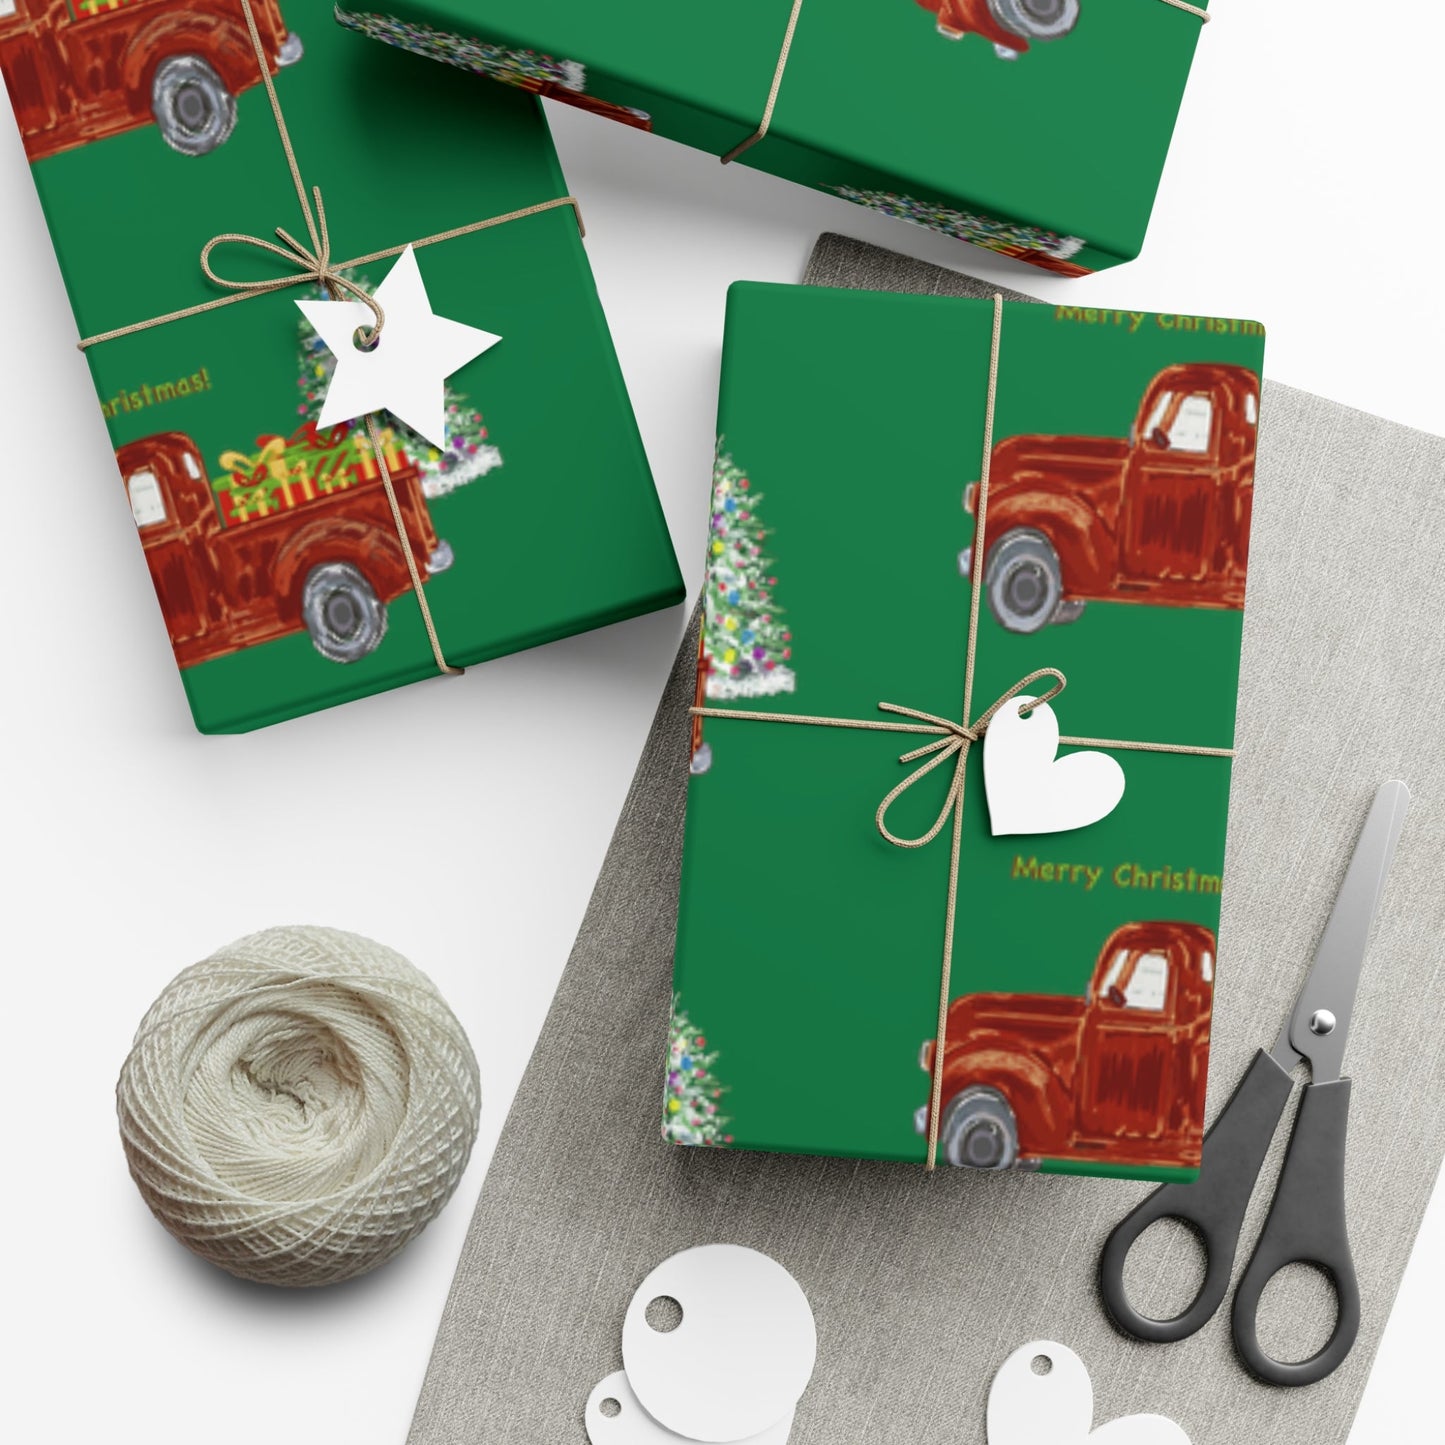 Christmas Truck Gift Wrapping Paper - Blue Cava